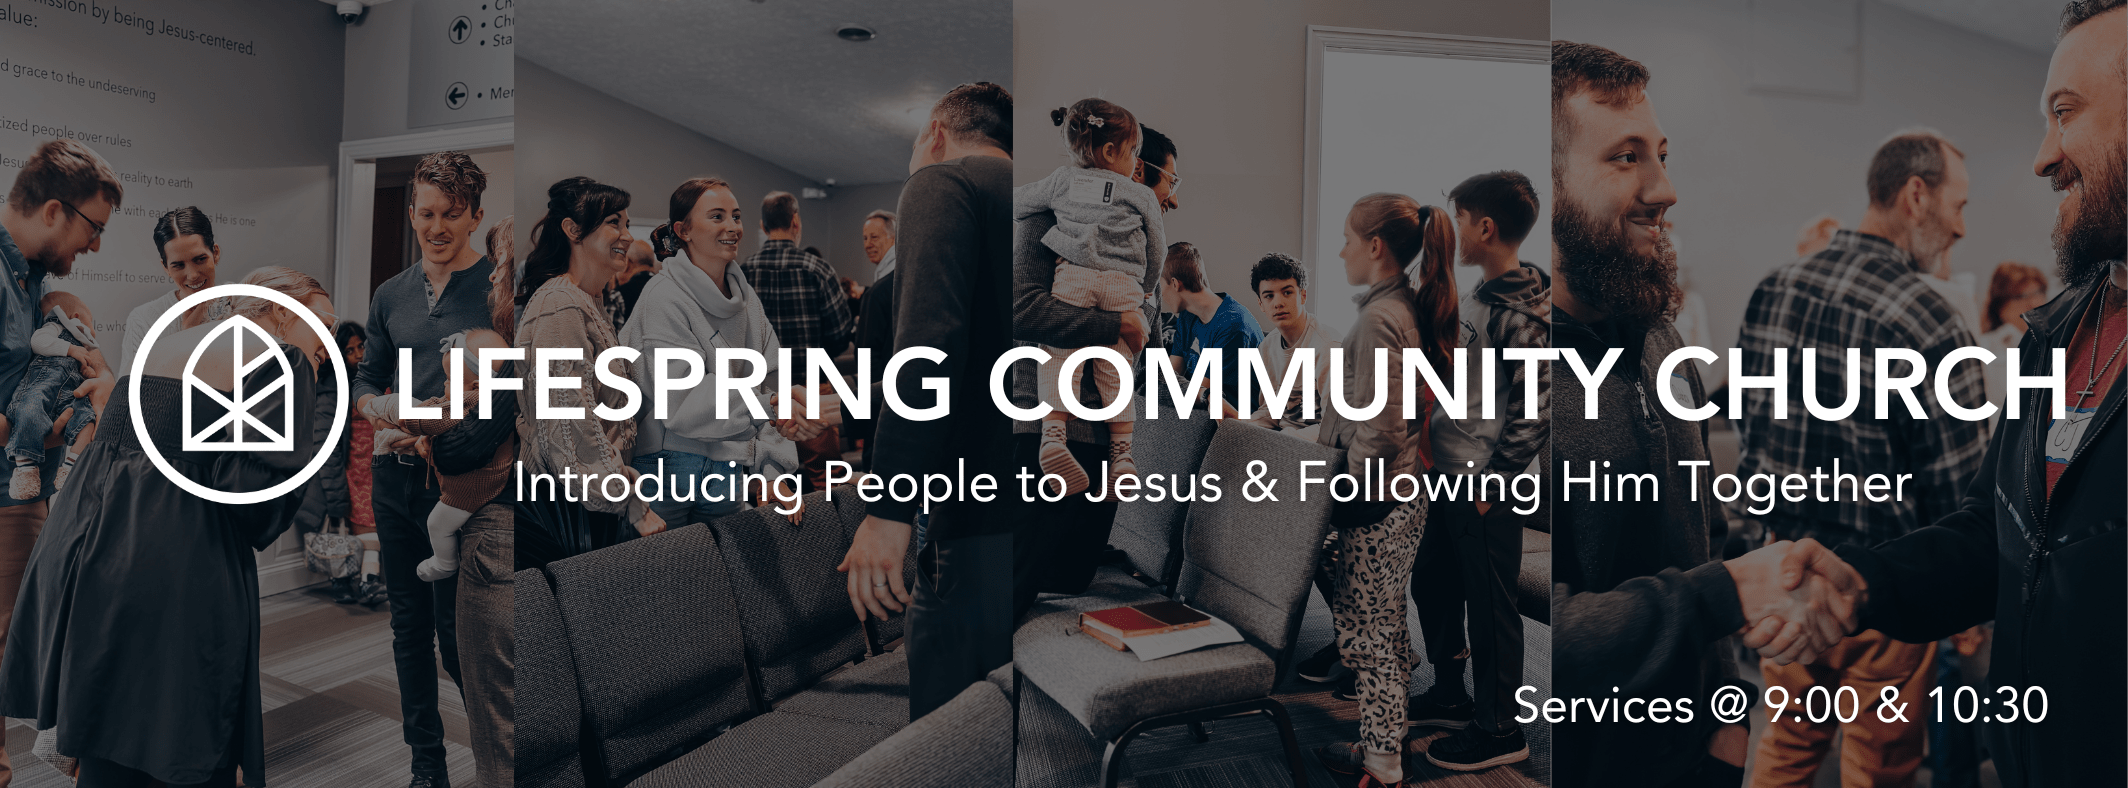 Lifespring Community Church, Introducing People to Jesus and Following Him Together